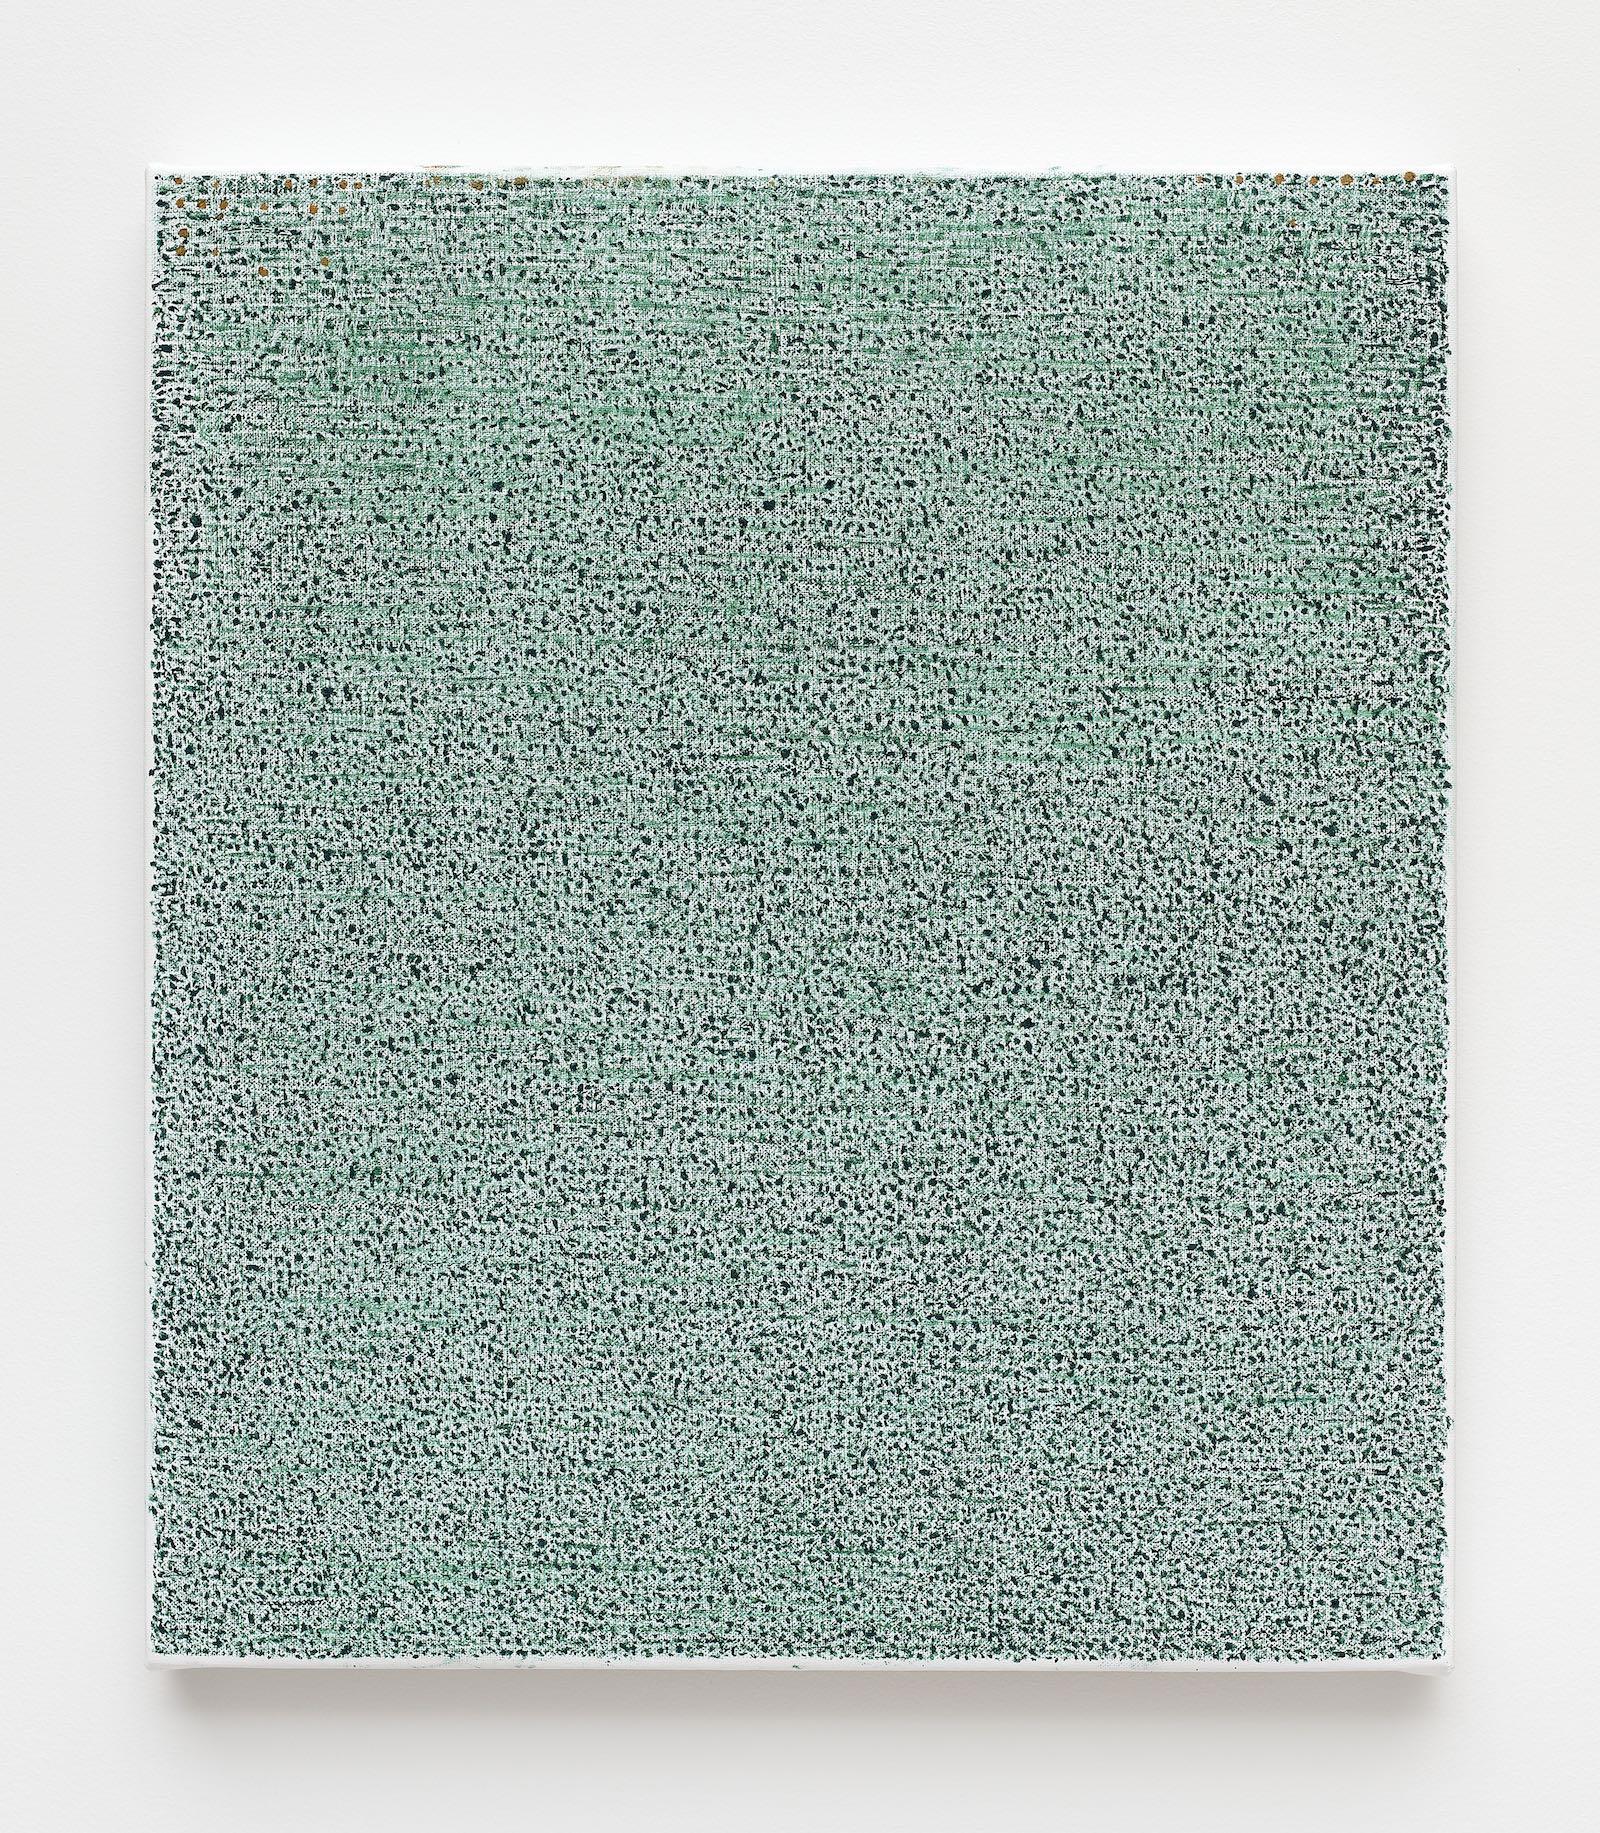 Howard Smith, Viridian Green, 2021. Oil on linen. 16 x 14 inches. Courtesy Jane Lombard Gallery.